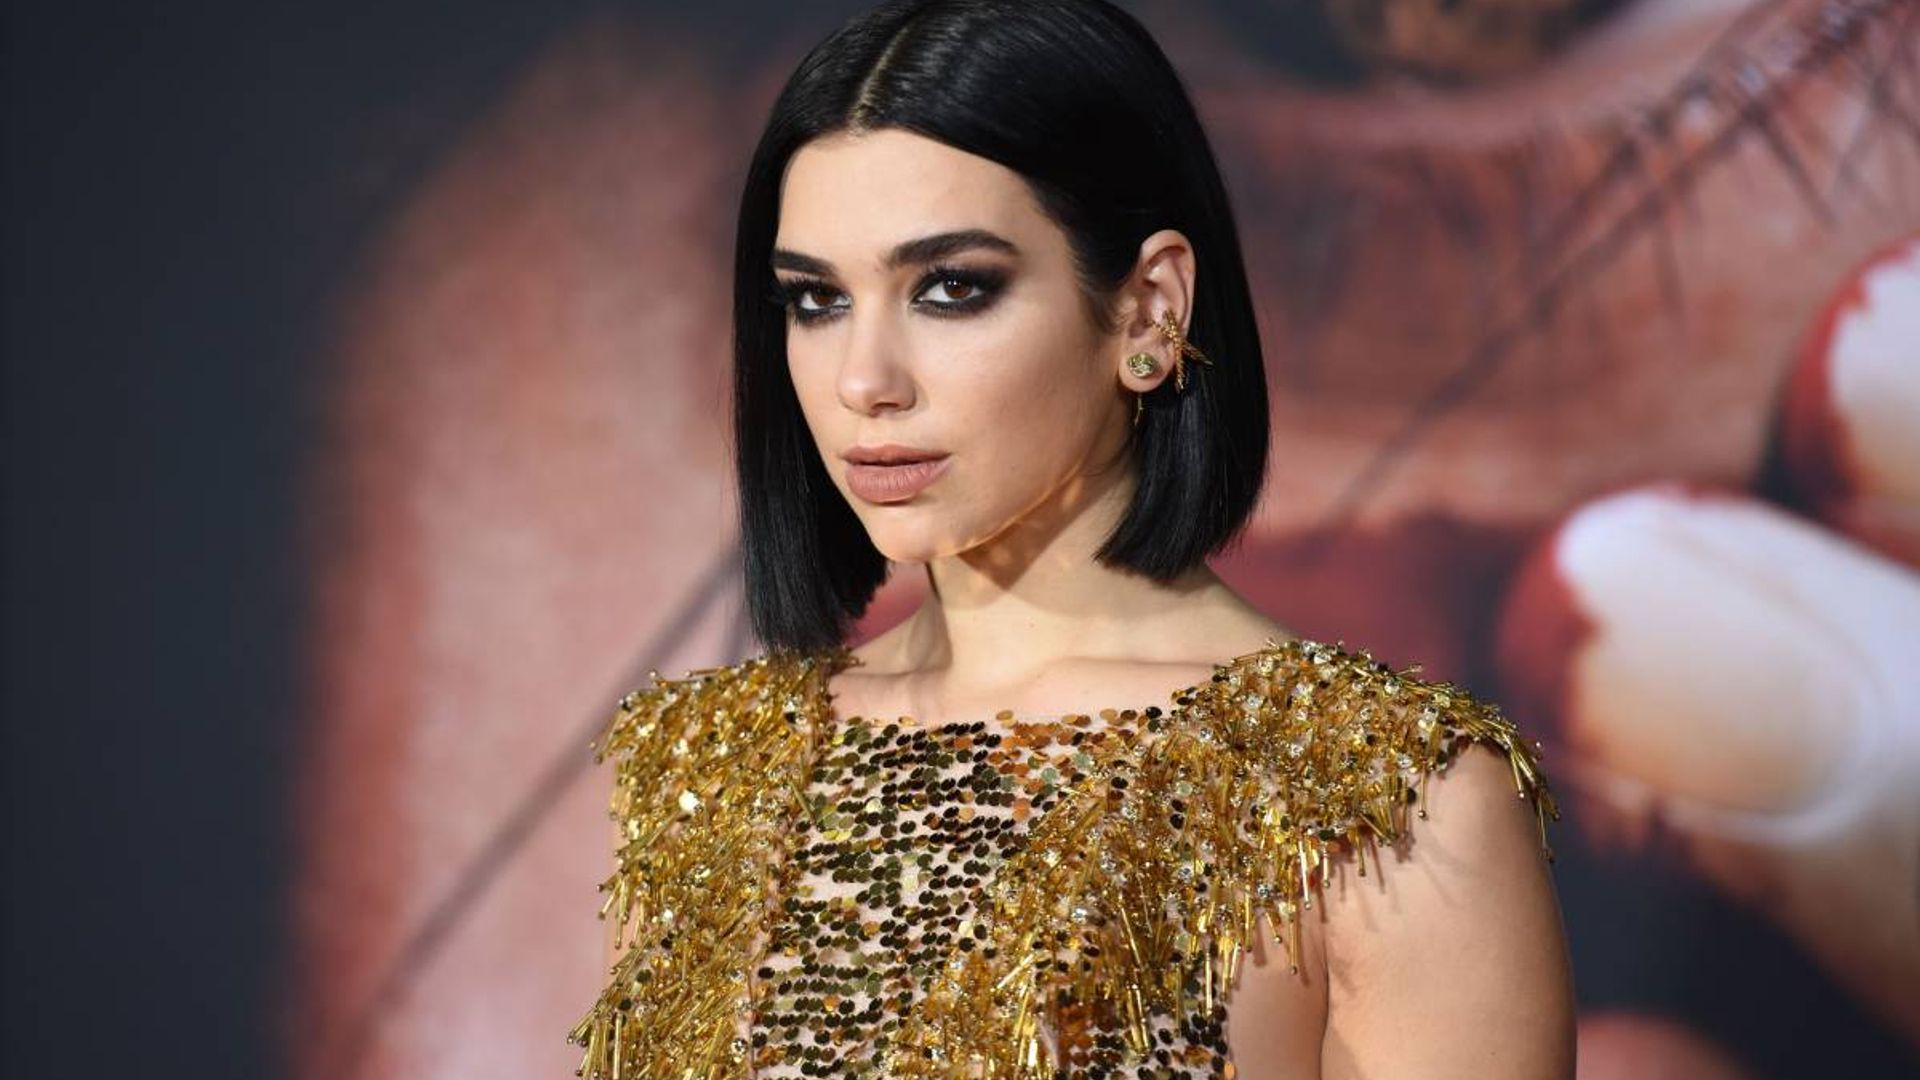 Dua Lipa wows in a strappy black vacation look - and fans are losing it